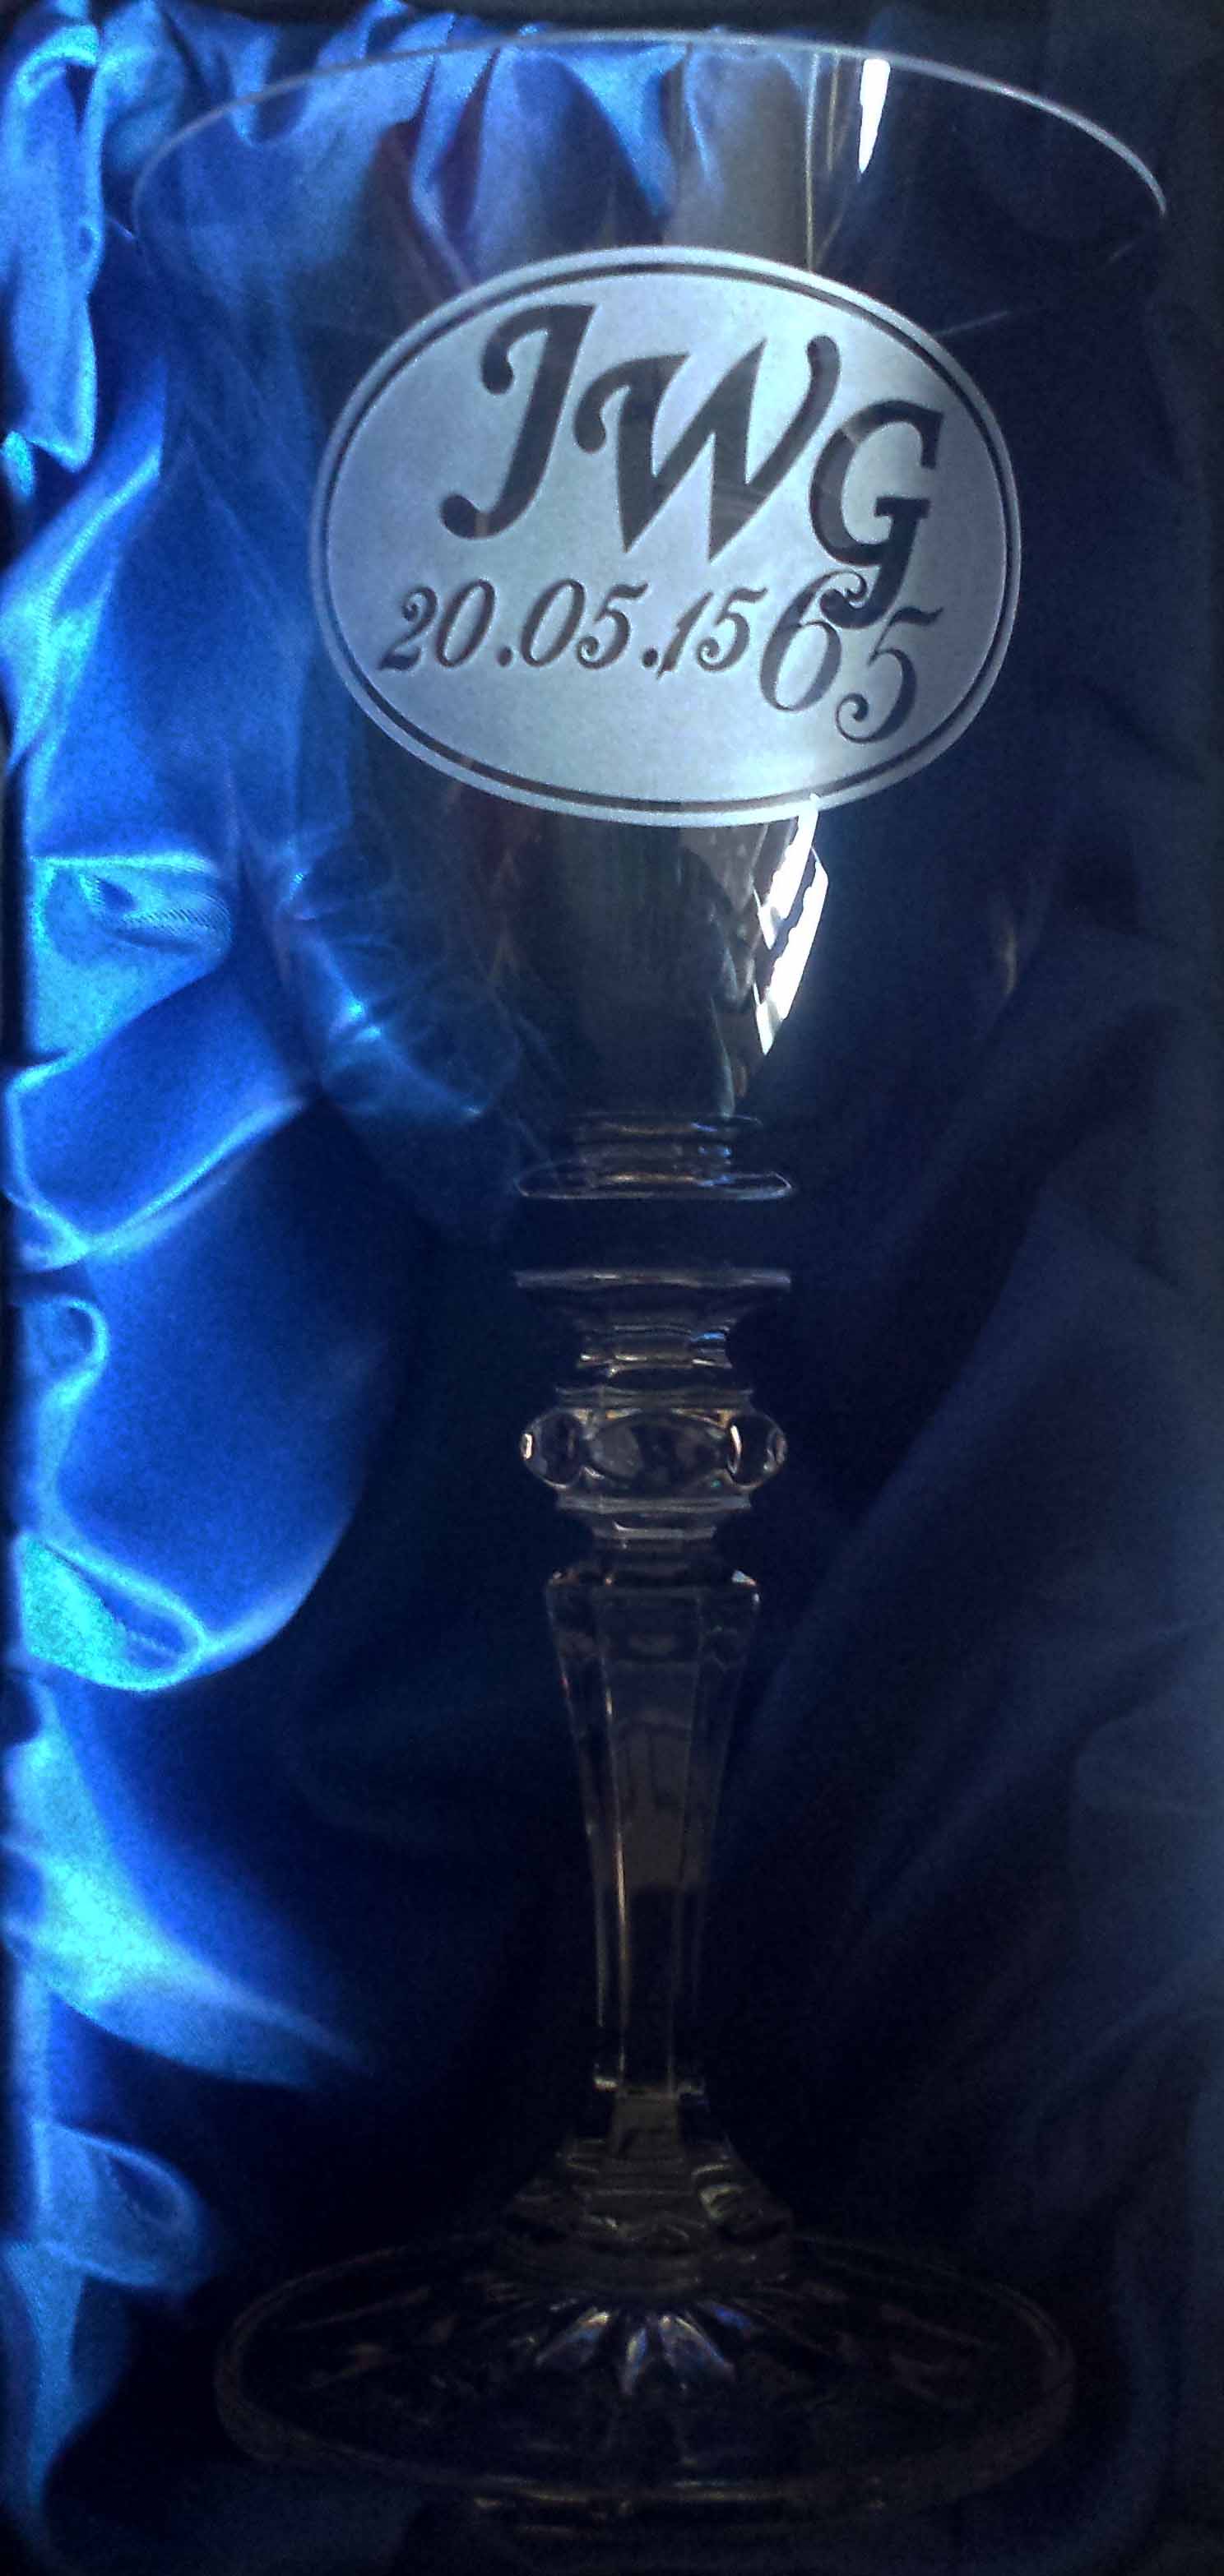 A crystal wine glass with the letters JWG and a date engraved in negative.